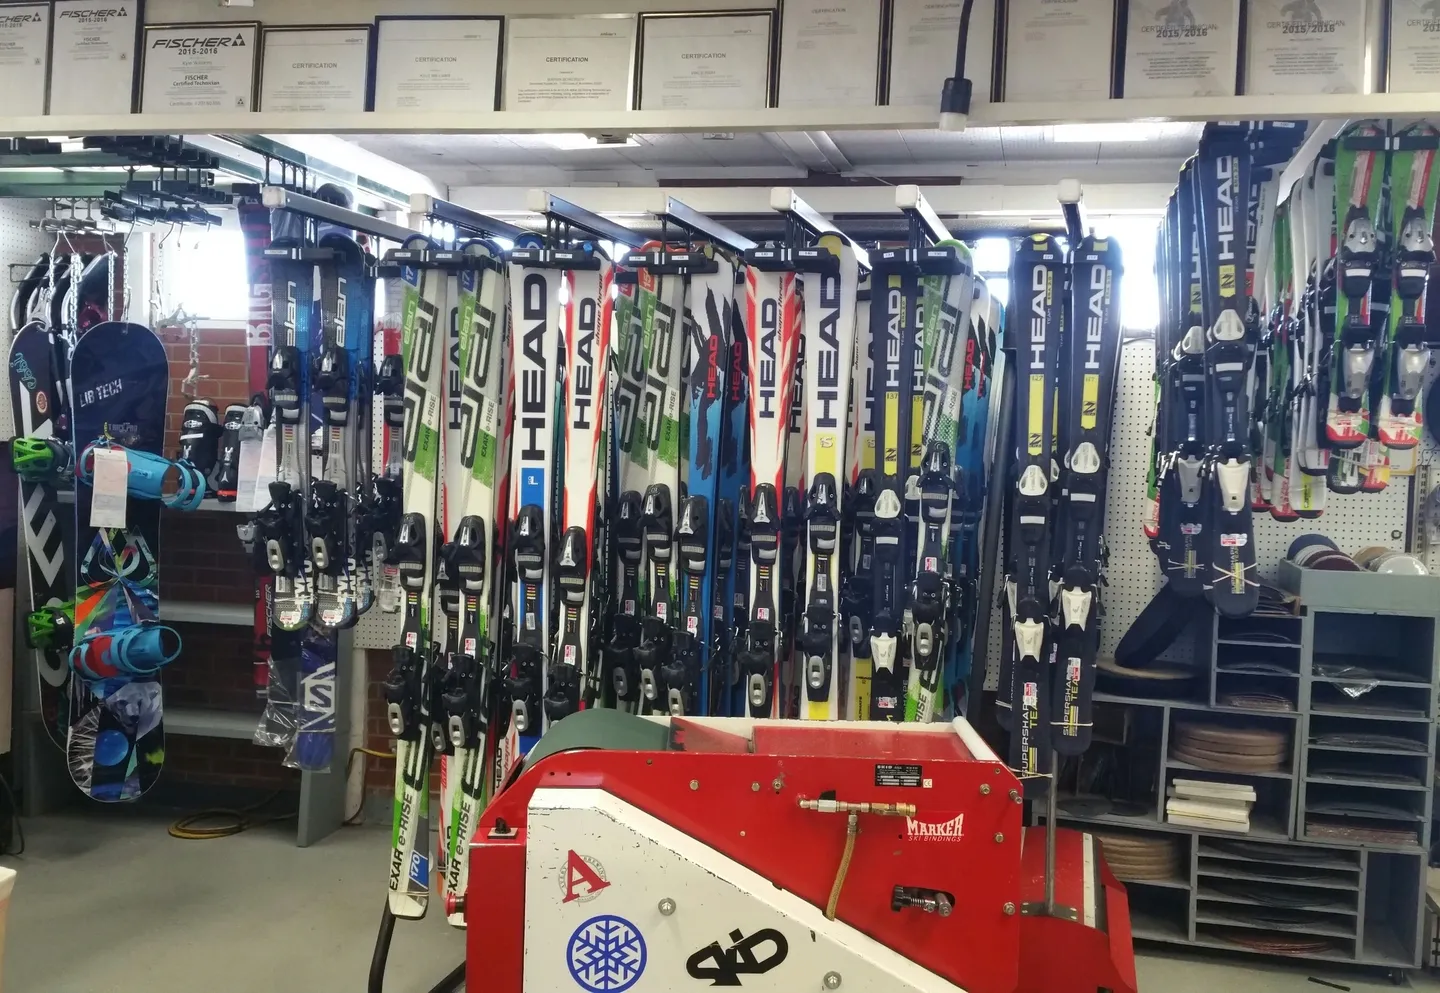 A red cart with skis on it in front of a rack.